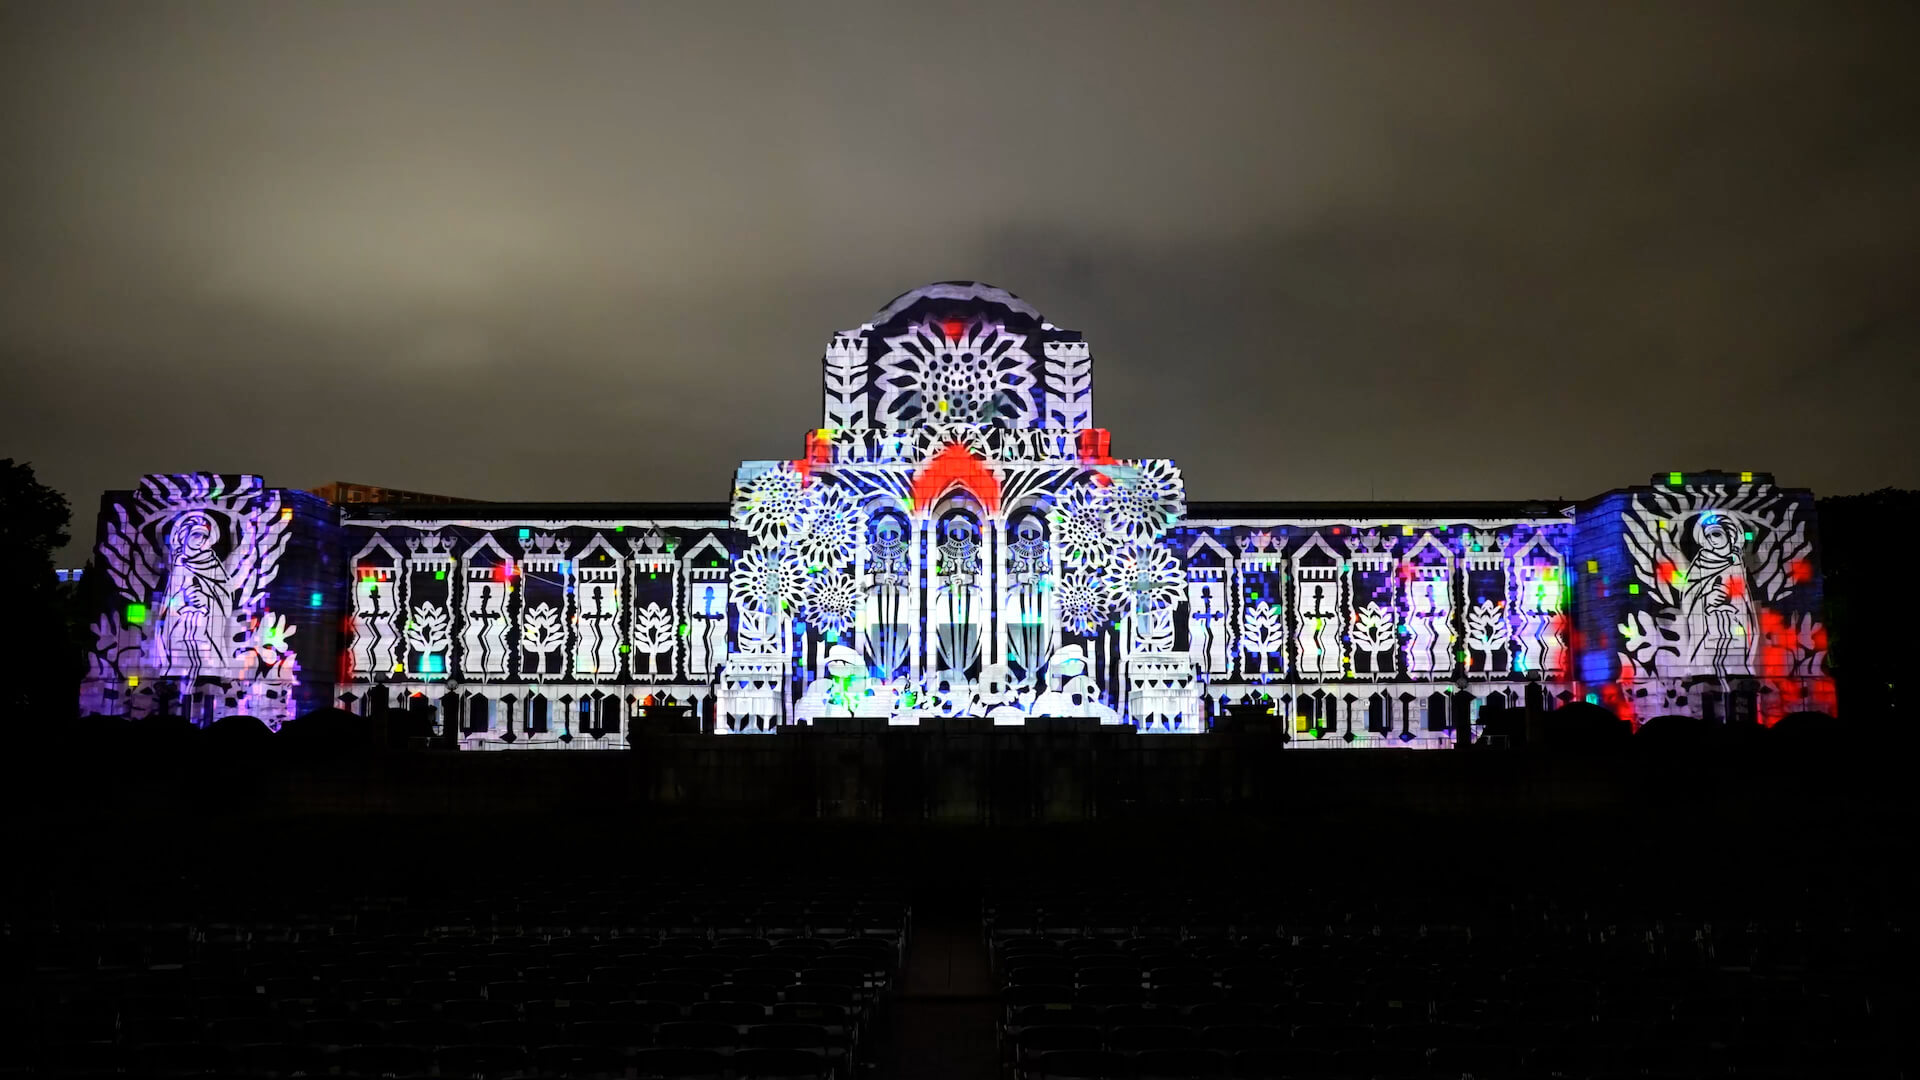 【REPORT】TOKYO LIGHTS 2022｜重要文化財が一夜限りの七変化！？『1minute Projection Mapping Competition』 art-culture221201-tokyolights-4